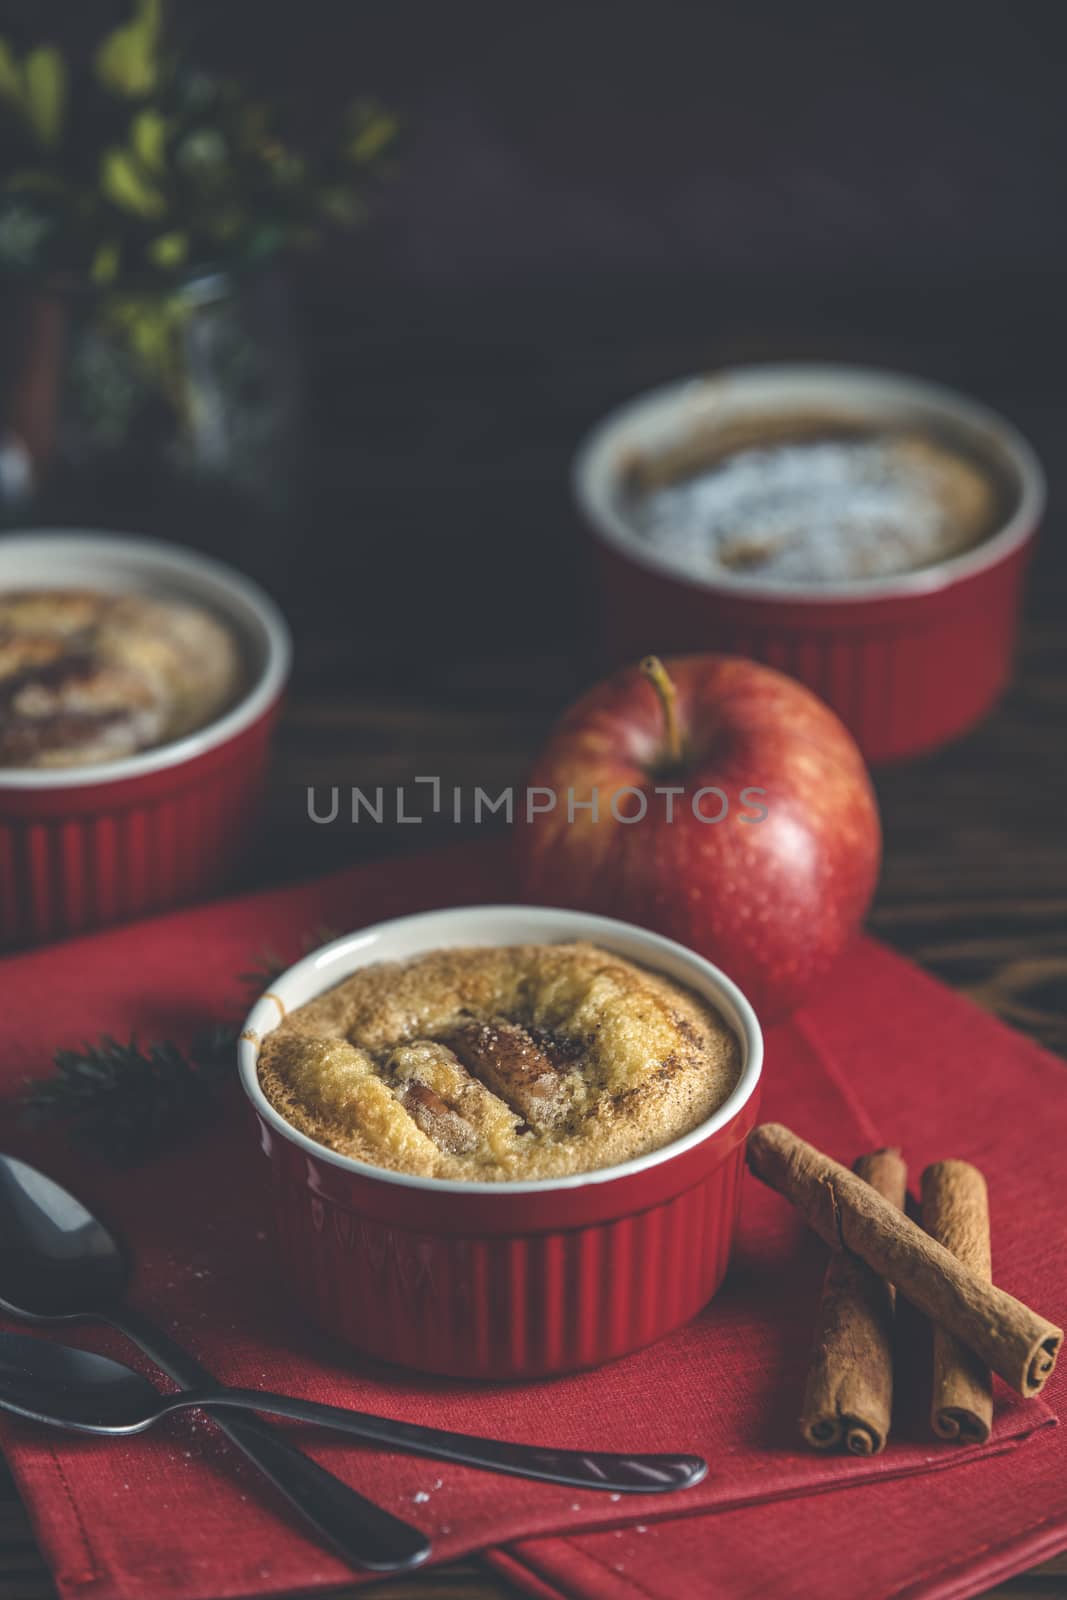 Three apple pies in ceramic baking molds with red napkin ramekin on dark wooden table. Close up, shallow depth of the field.